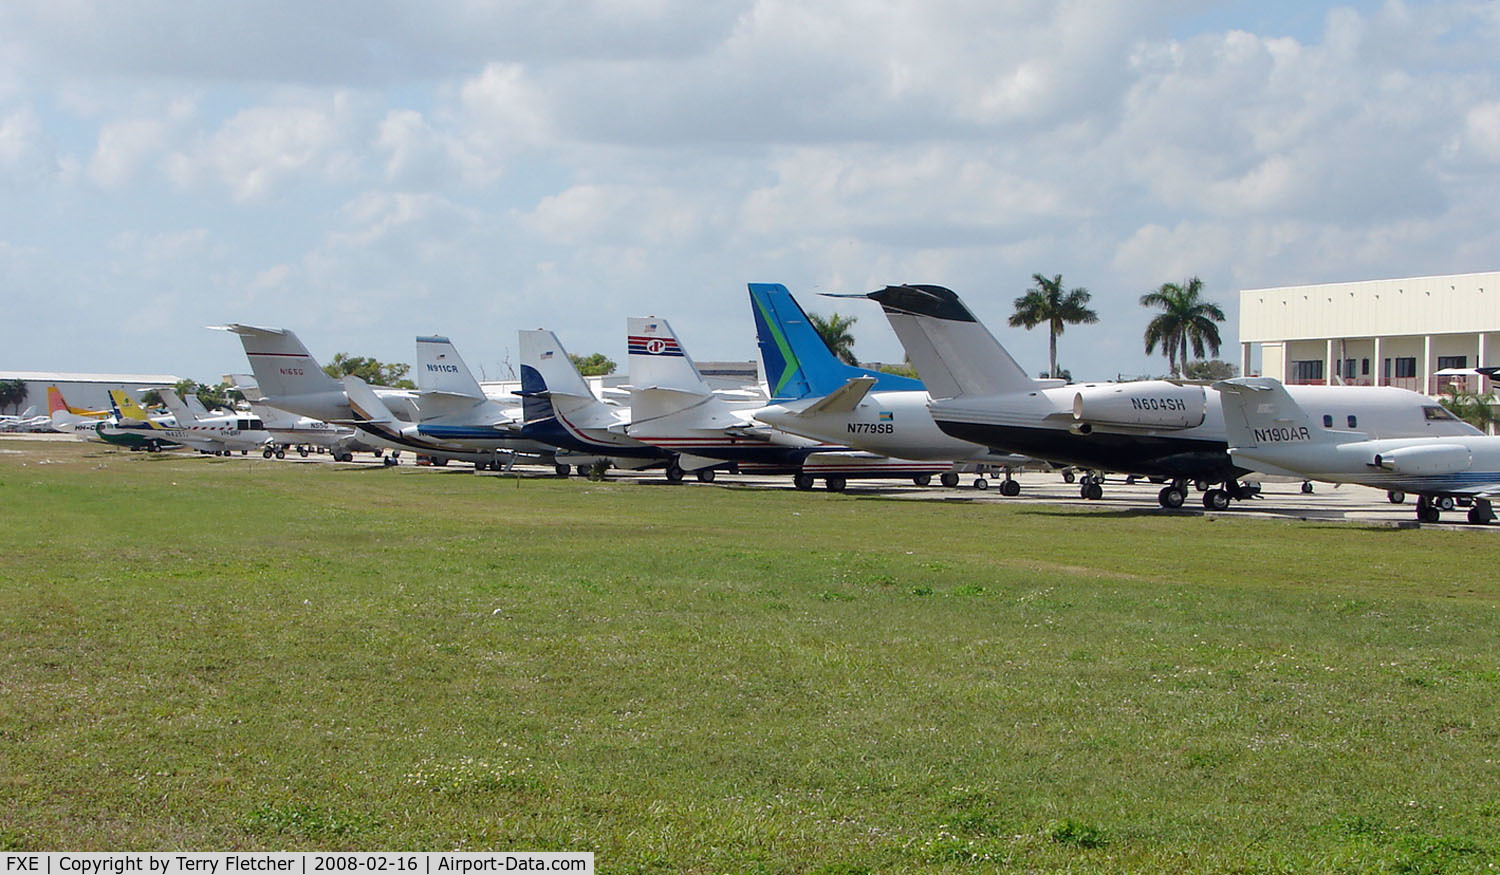 Fort Lauderdale Executive Airport (FXE) - Aview down World Jet's ramp at Ft.Lauderdale Executive reveals a diverse ramp of aircraft types , some of which now fall into the 'classic' category